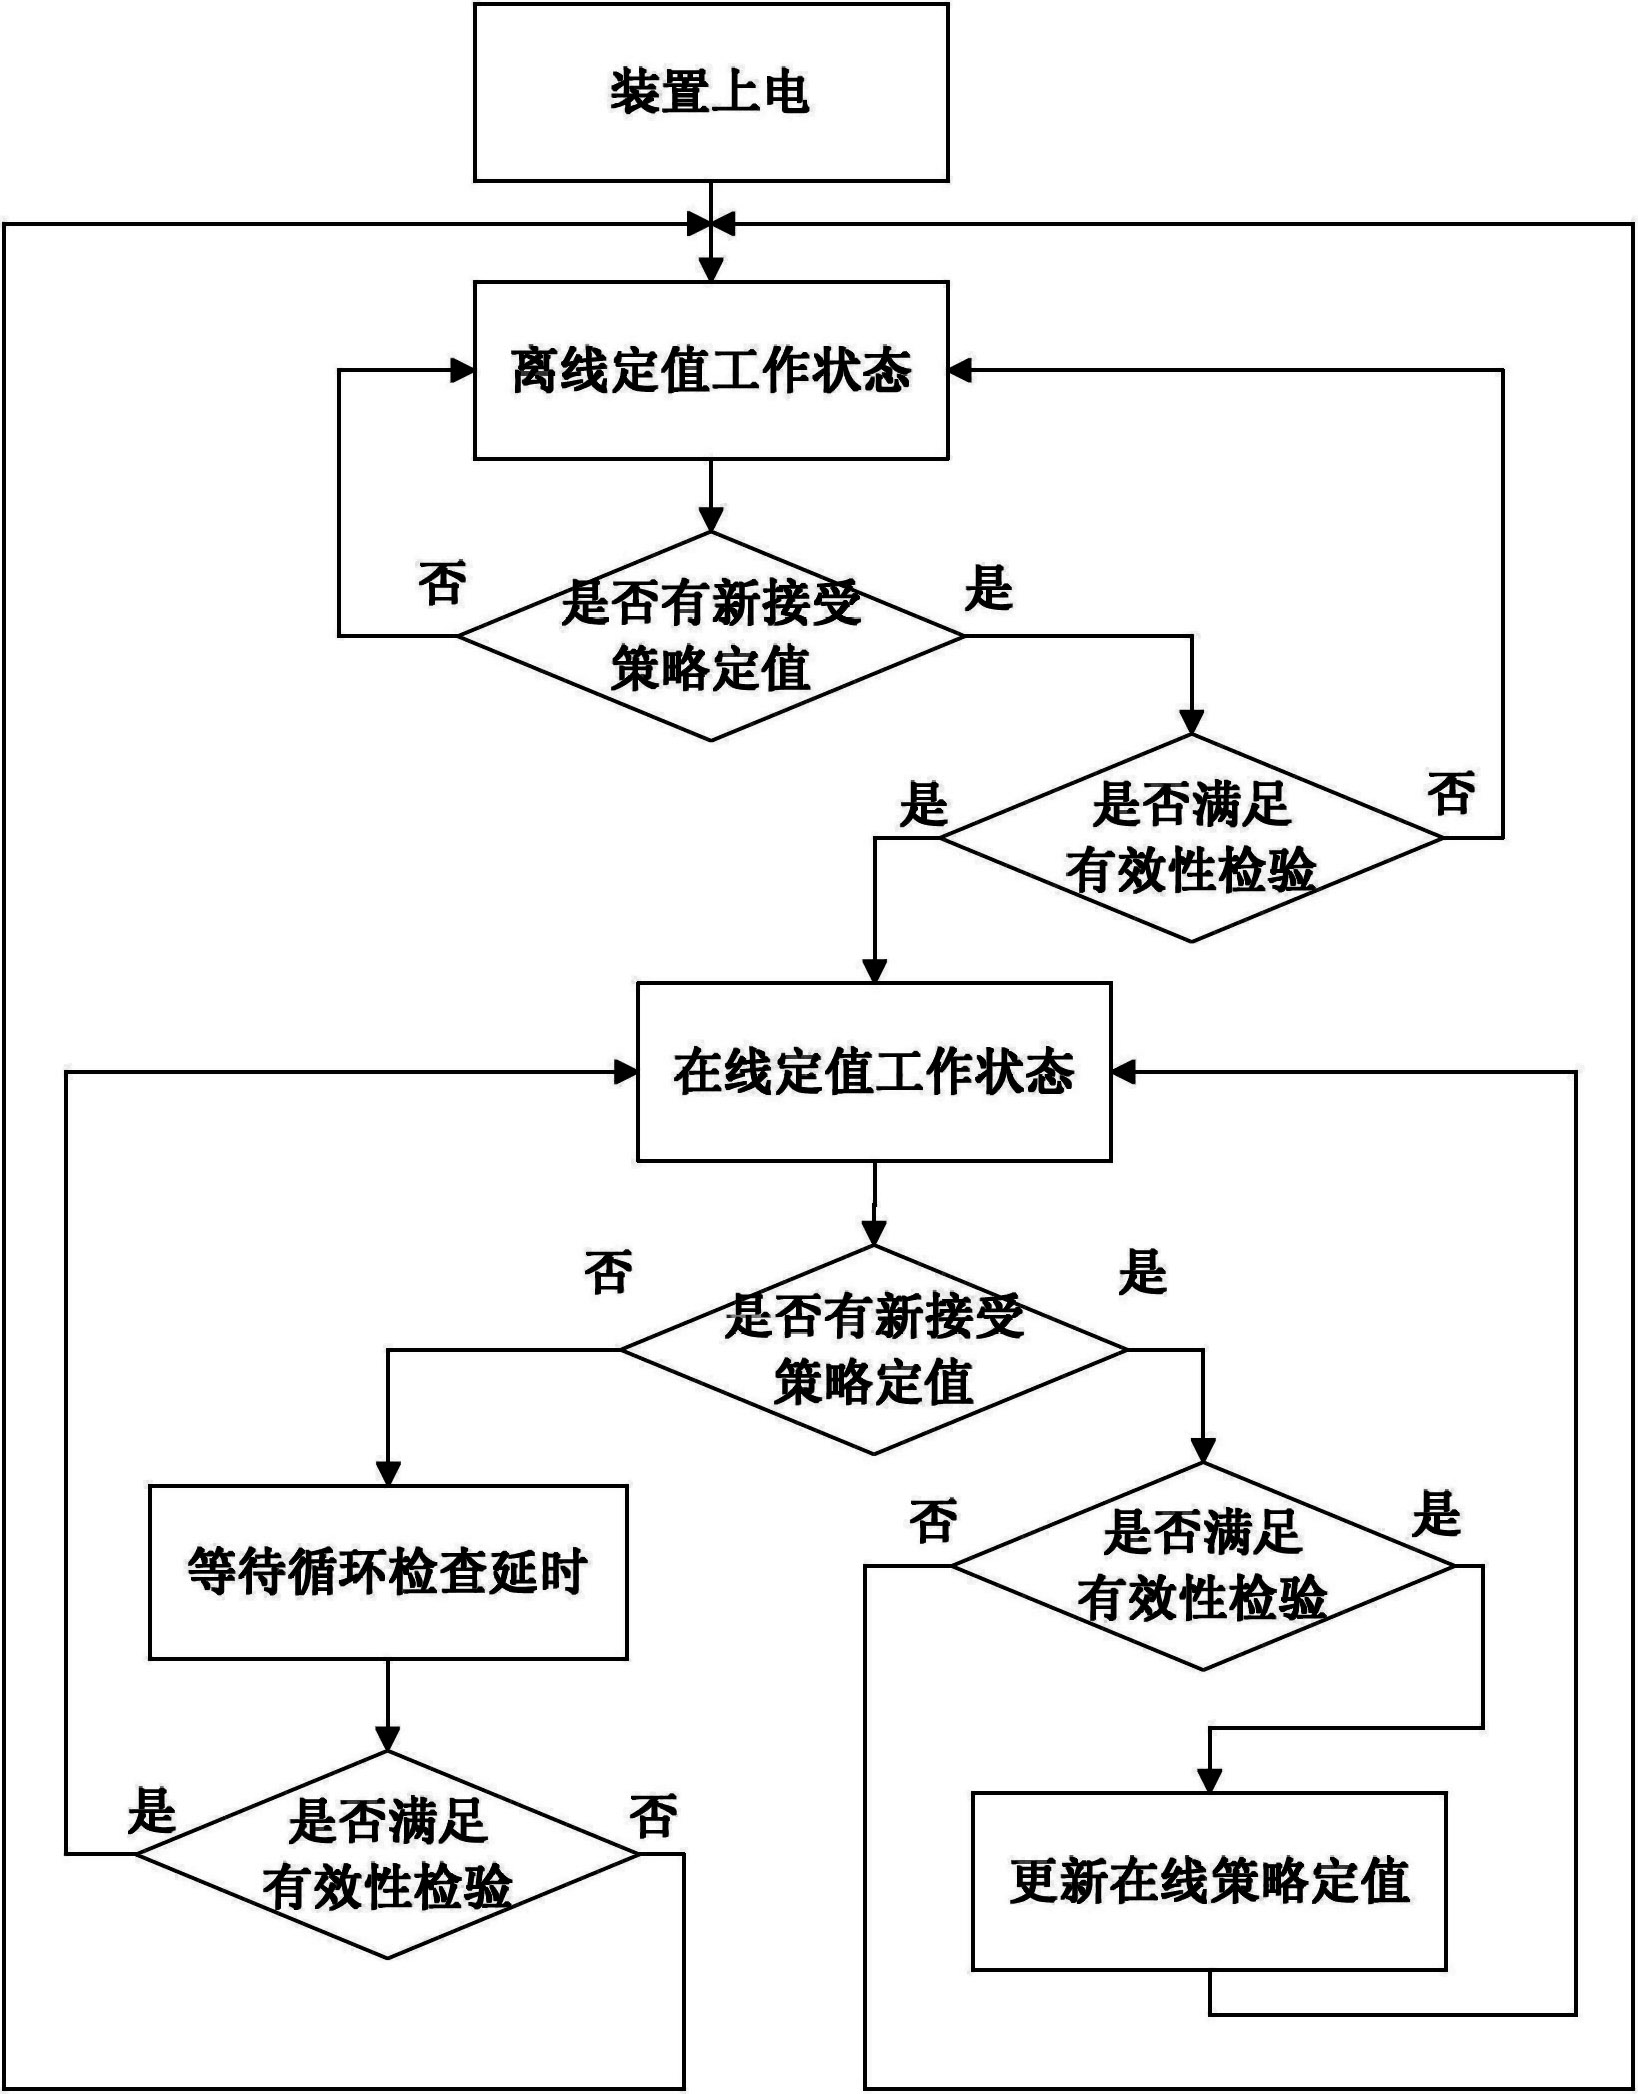 On-line control strategy switching method for security control device by using strategy effective conditions